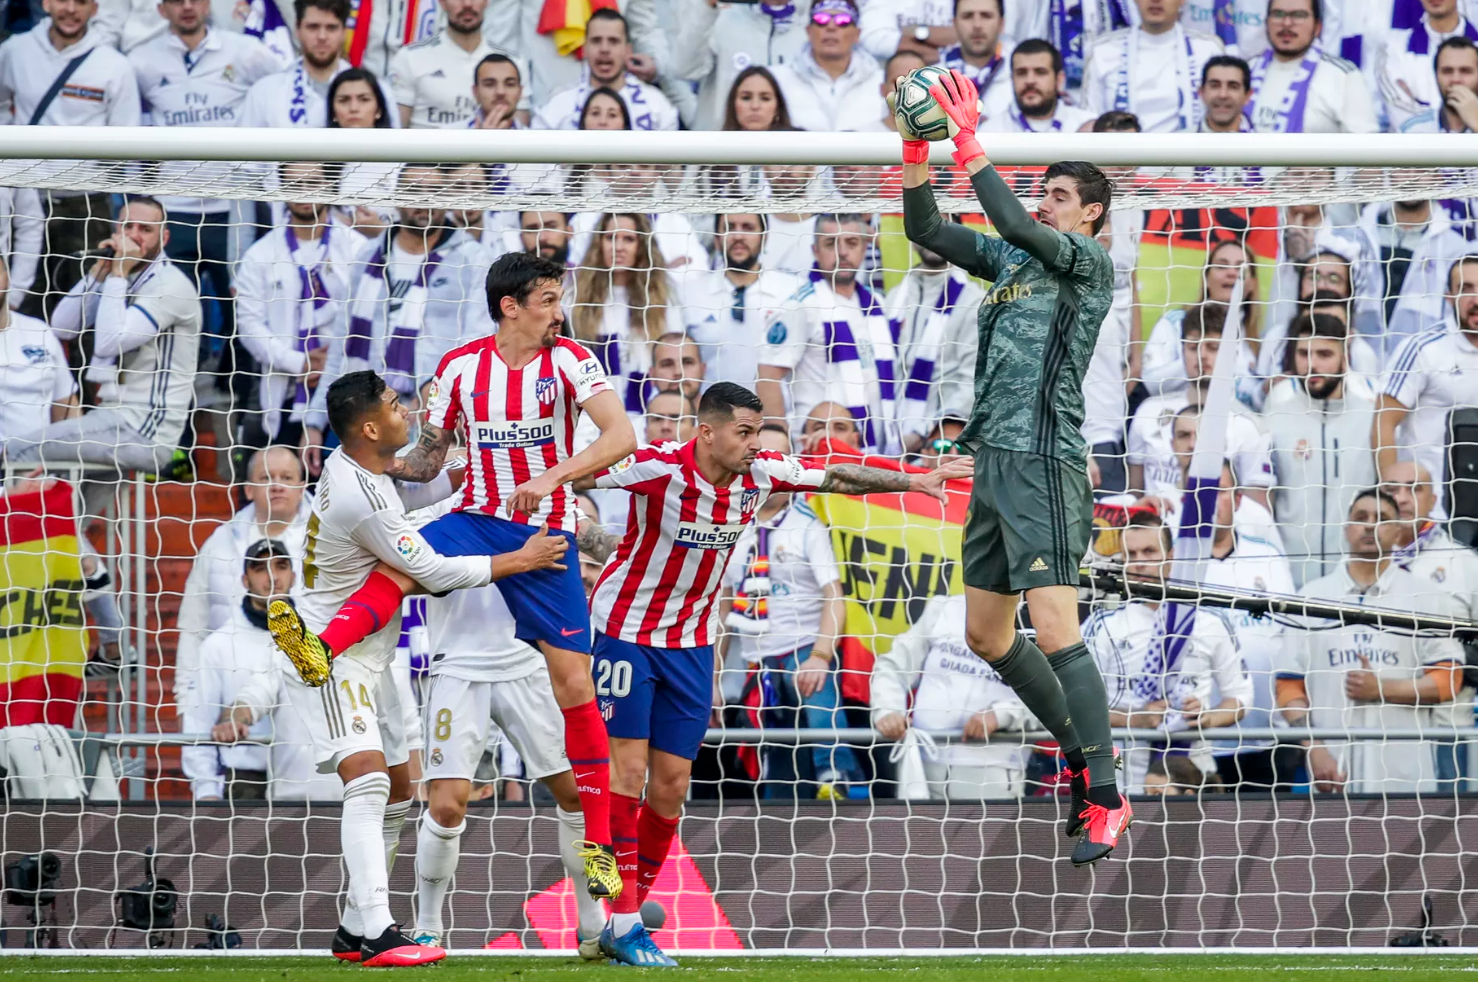 Courtois: “The tactical change in the second half allowed us to press better” - Bóng Đá